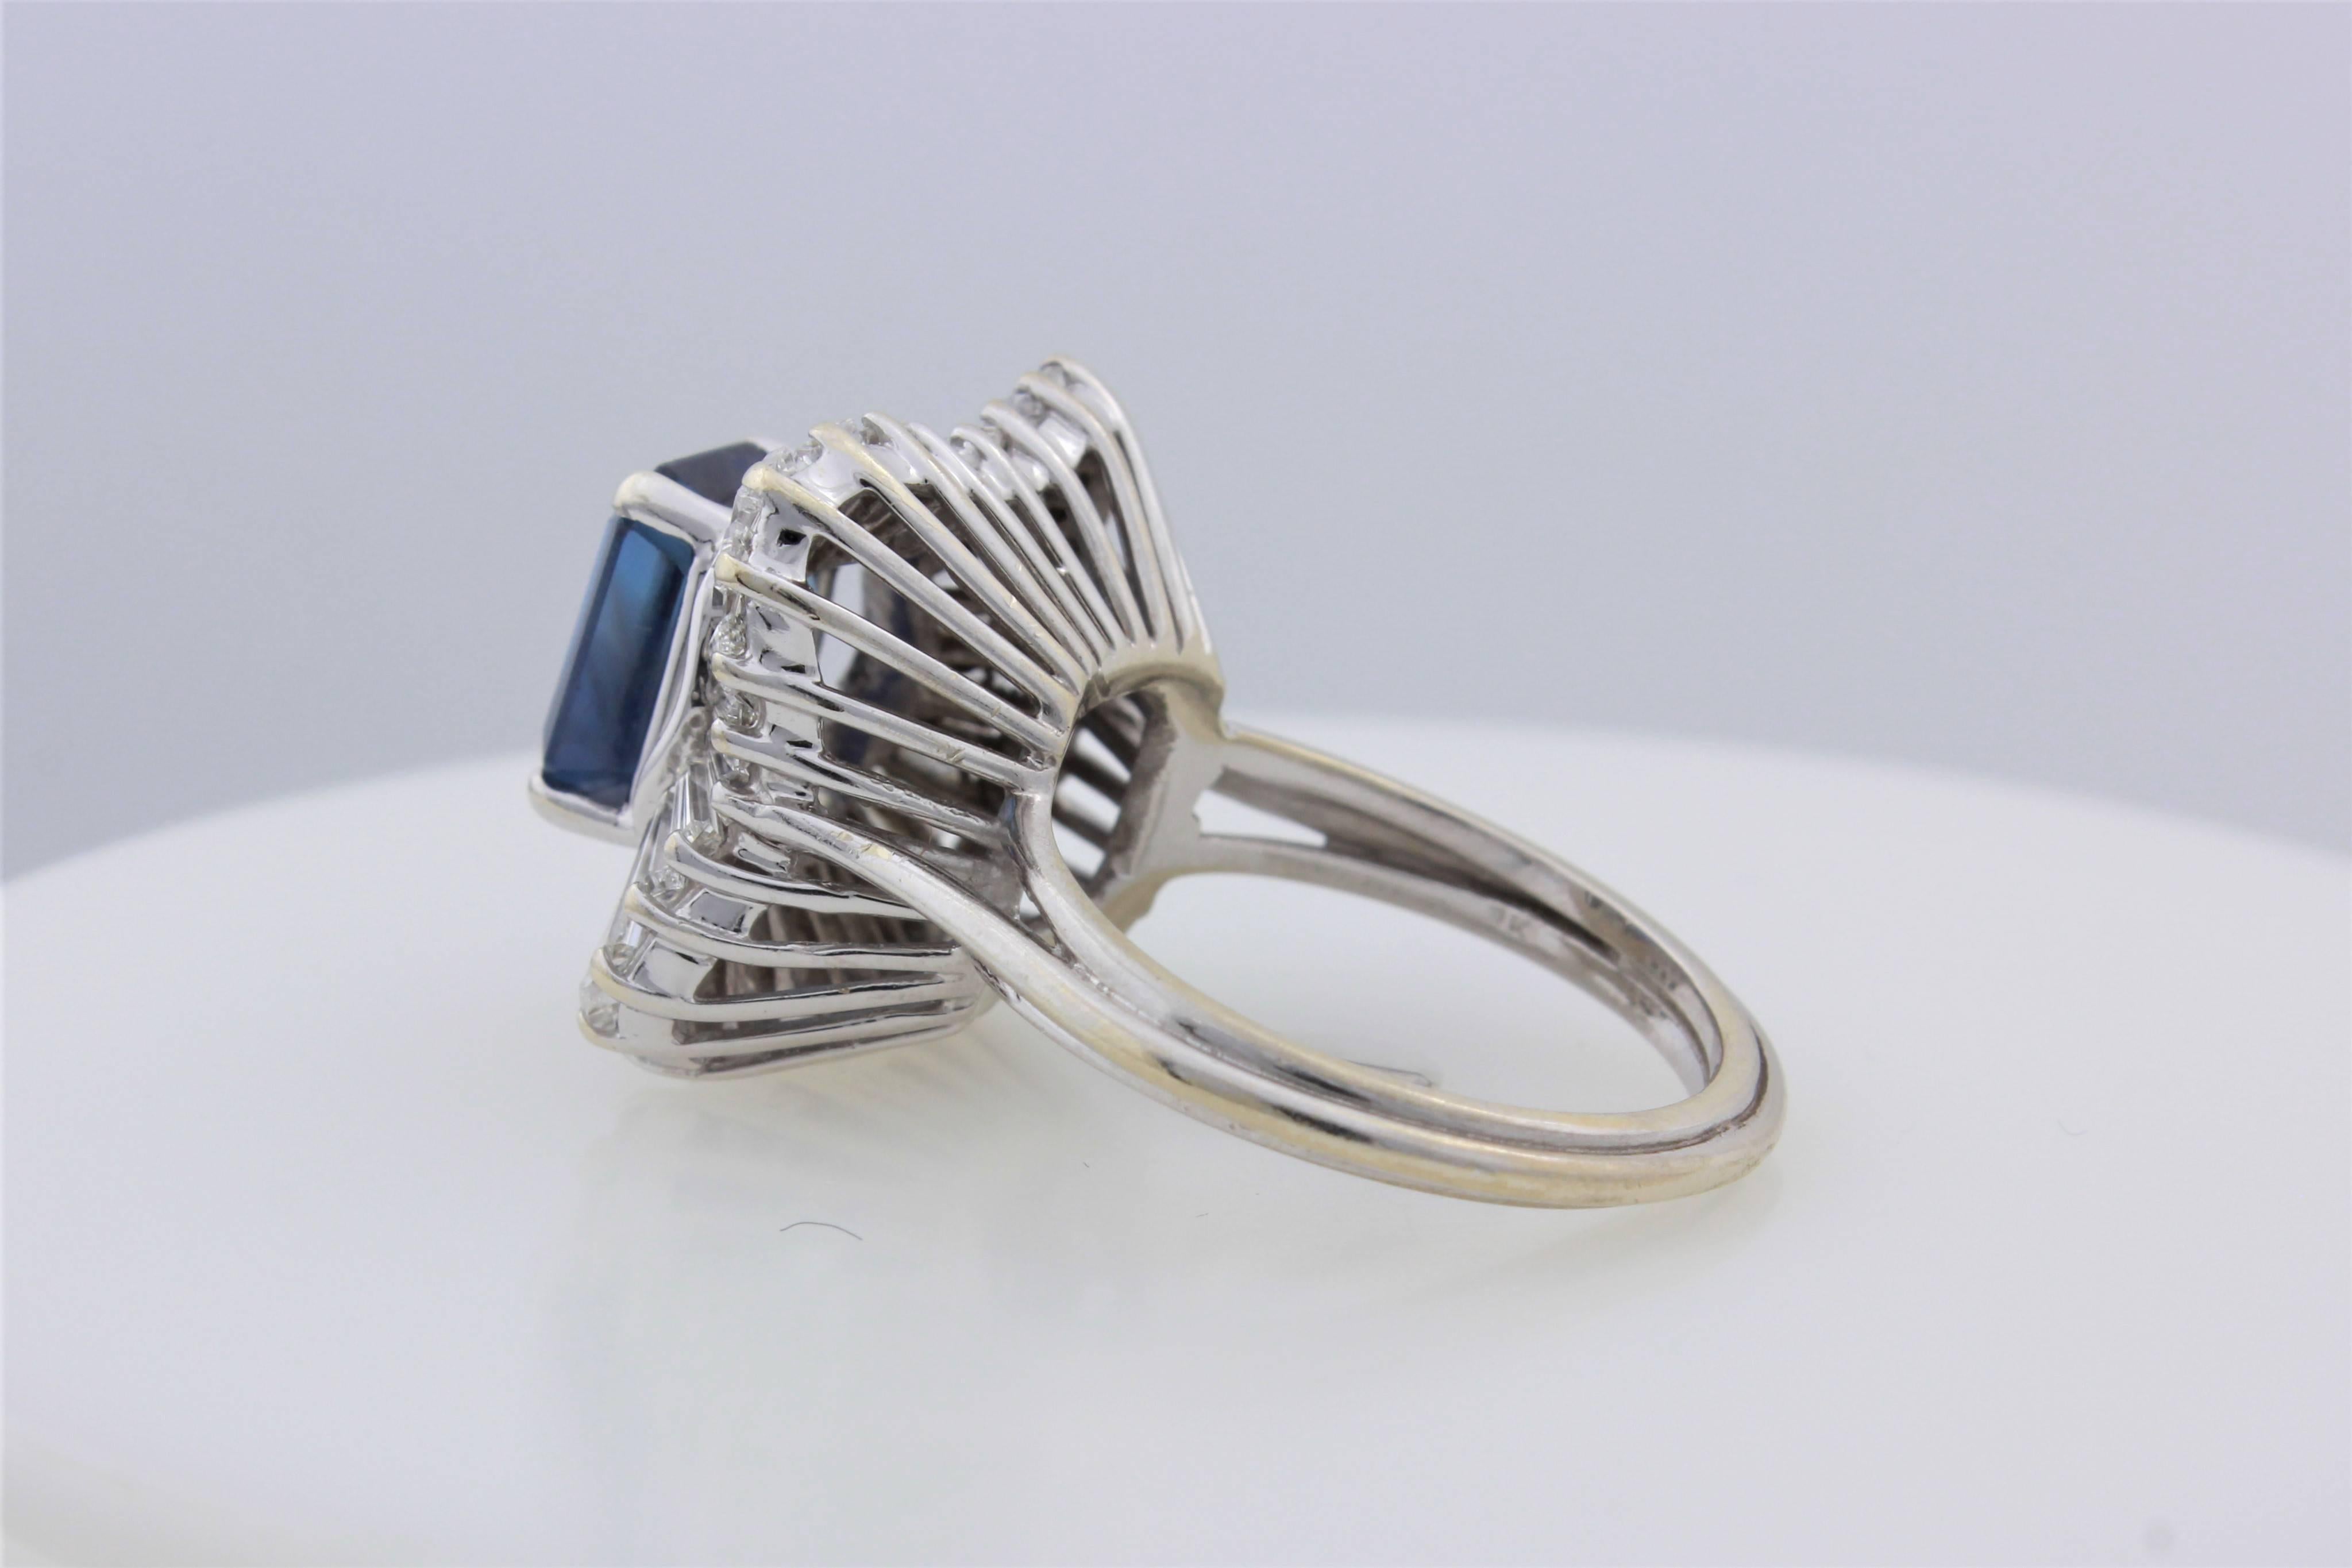 18kt White Gold 3 1/2 ct Sapphire and 4 ct Baguette Diamond Ballerina Style Ring In Good Condition For Sale In Walnut Creek, CA